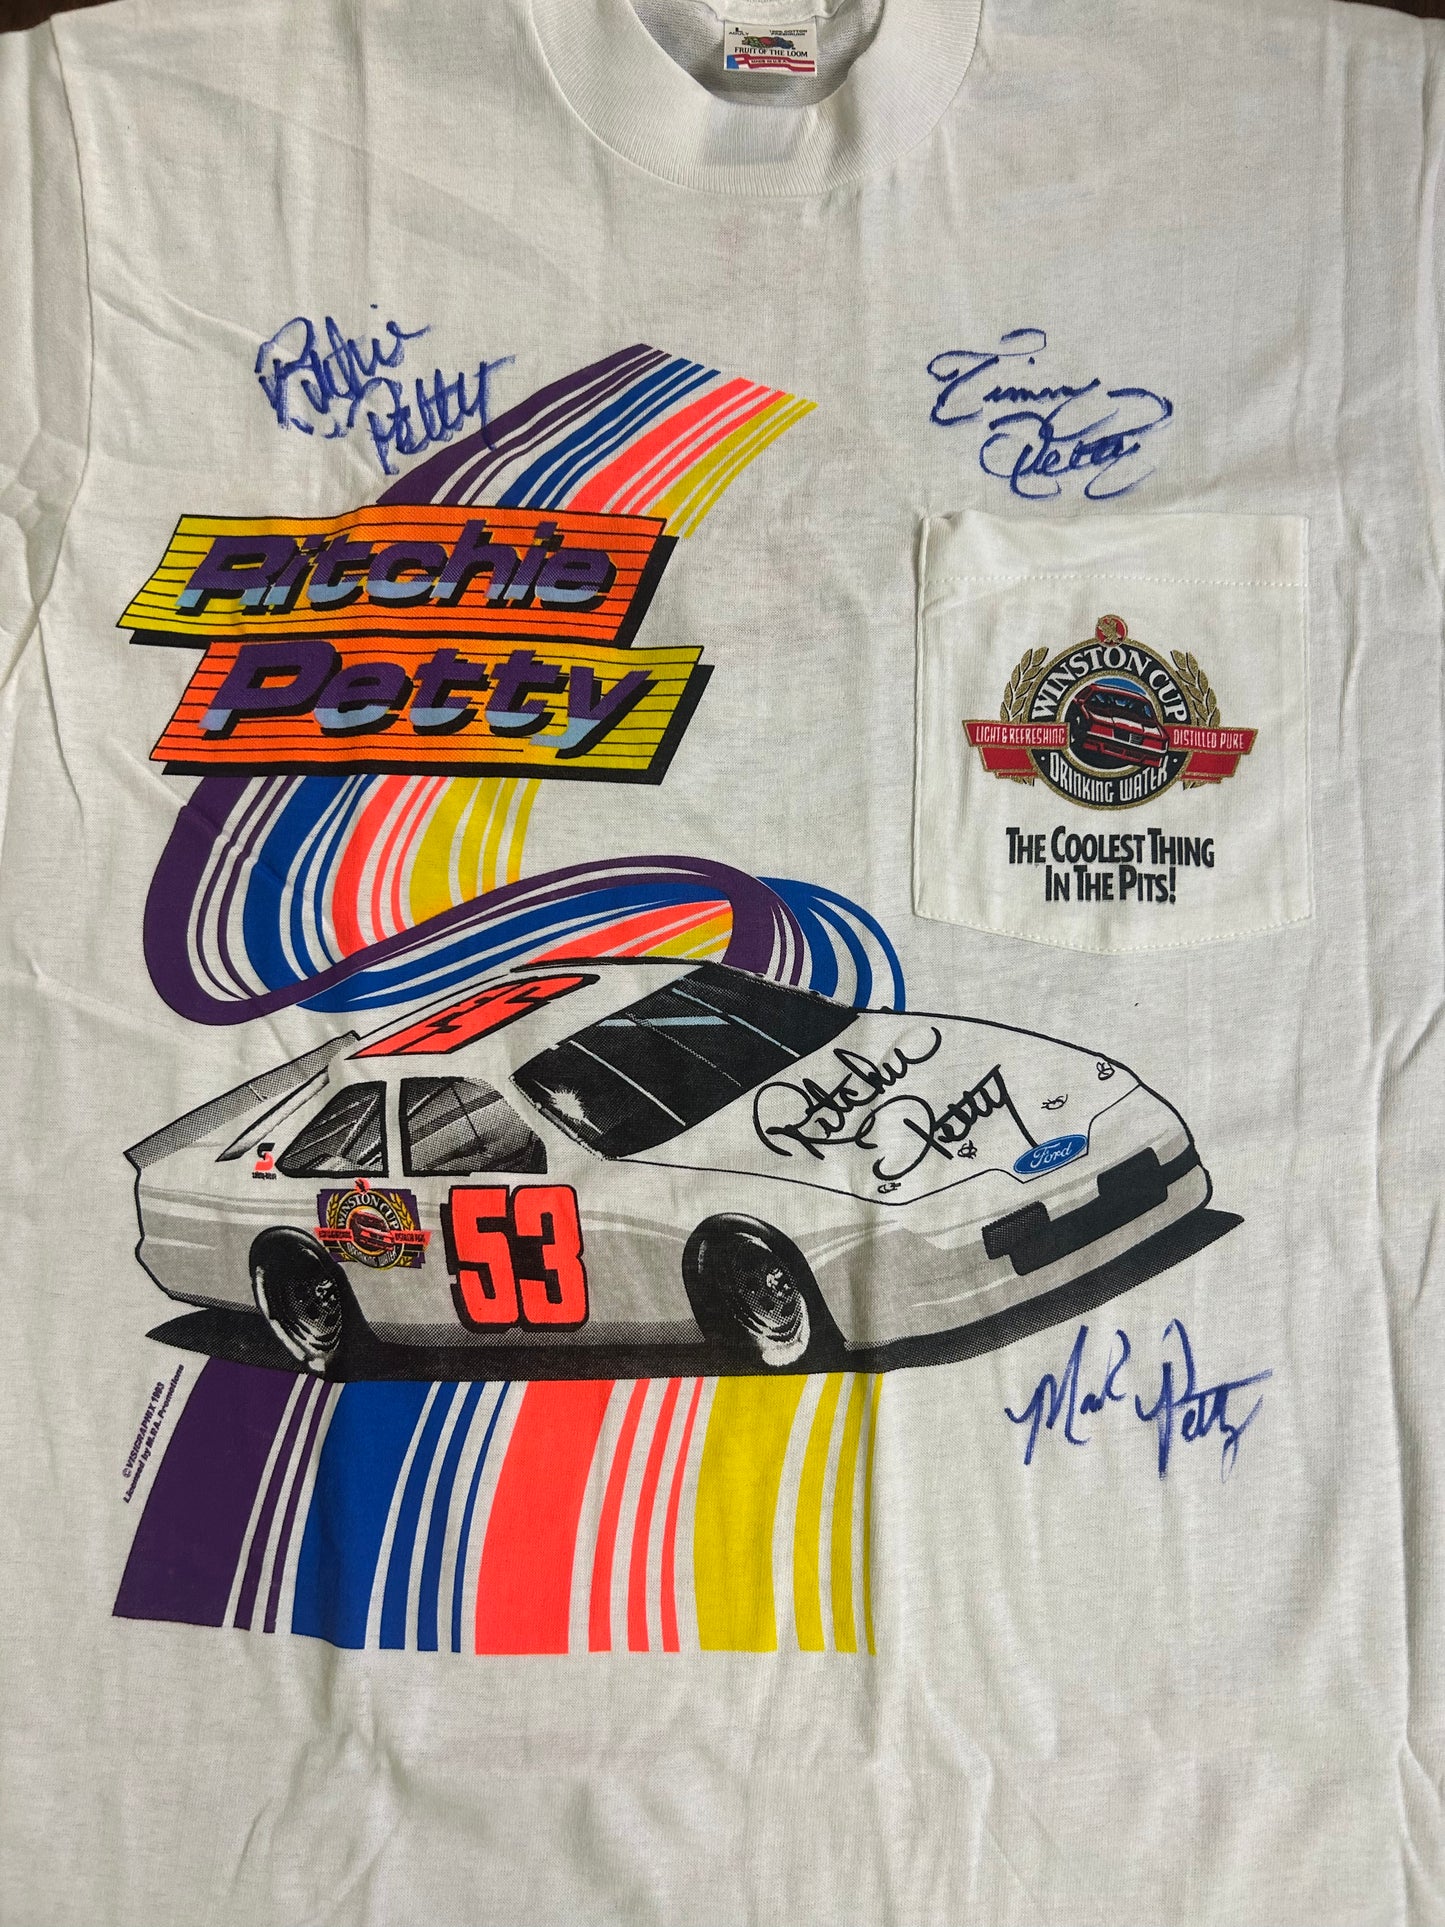 Ritchie Petty Tee- Petty Brothers Signed